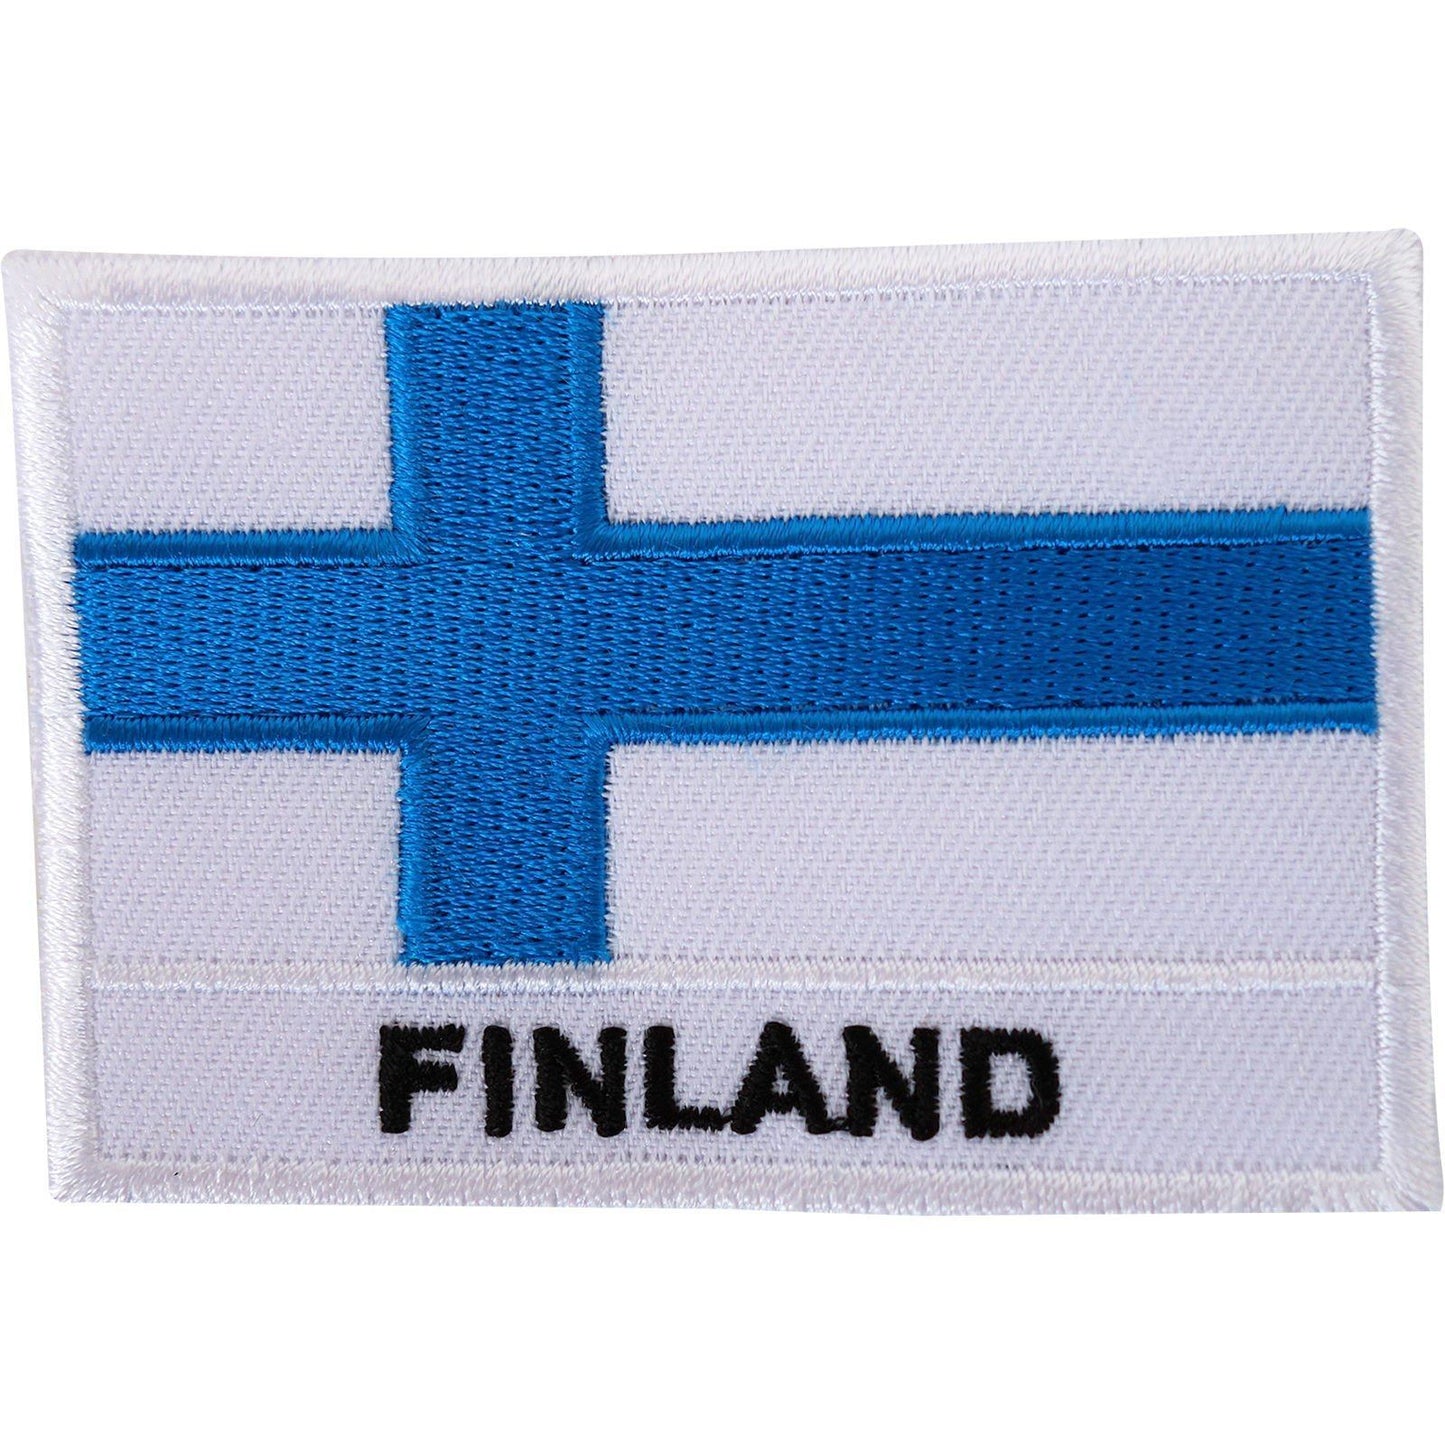 Finland Flag Embroidered Iron Sew On Patch Finnish Shirt Jacket Embroidery Badge